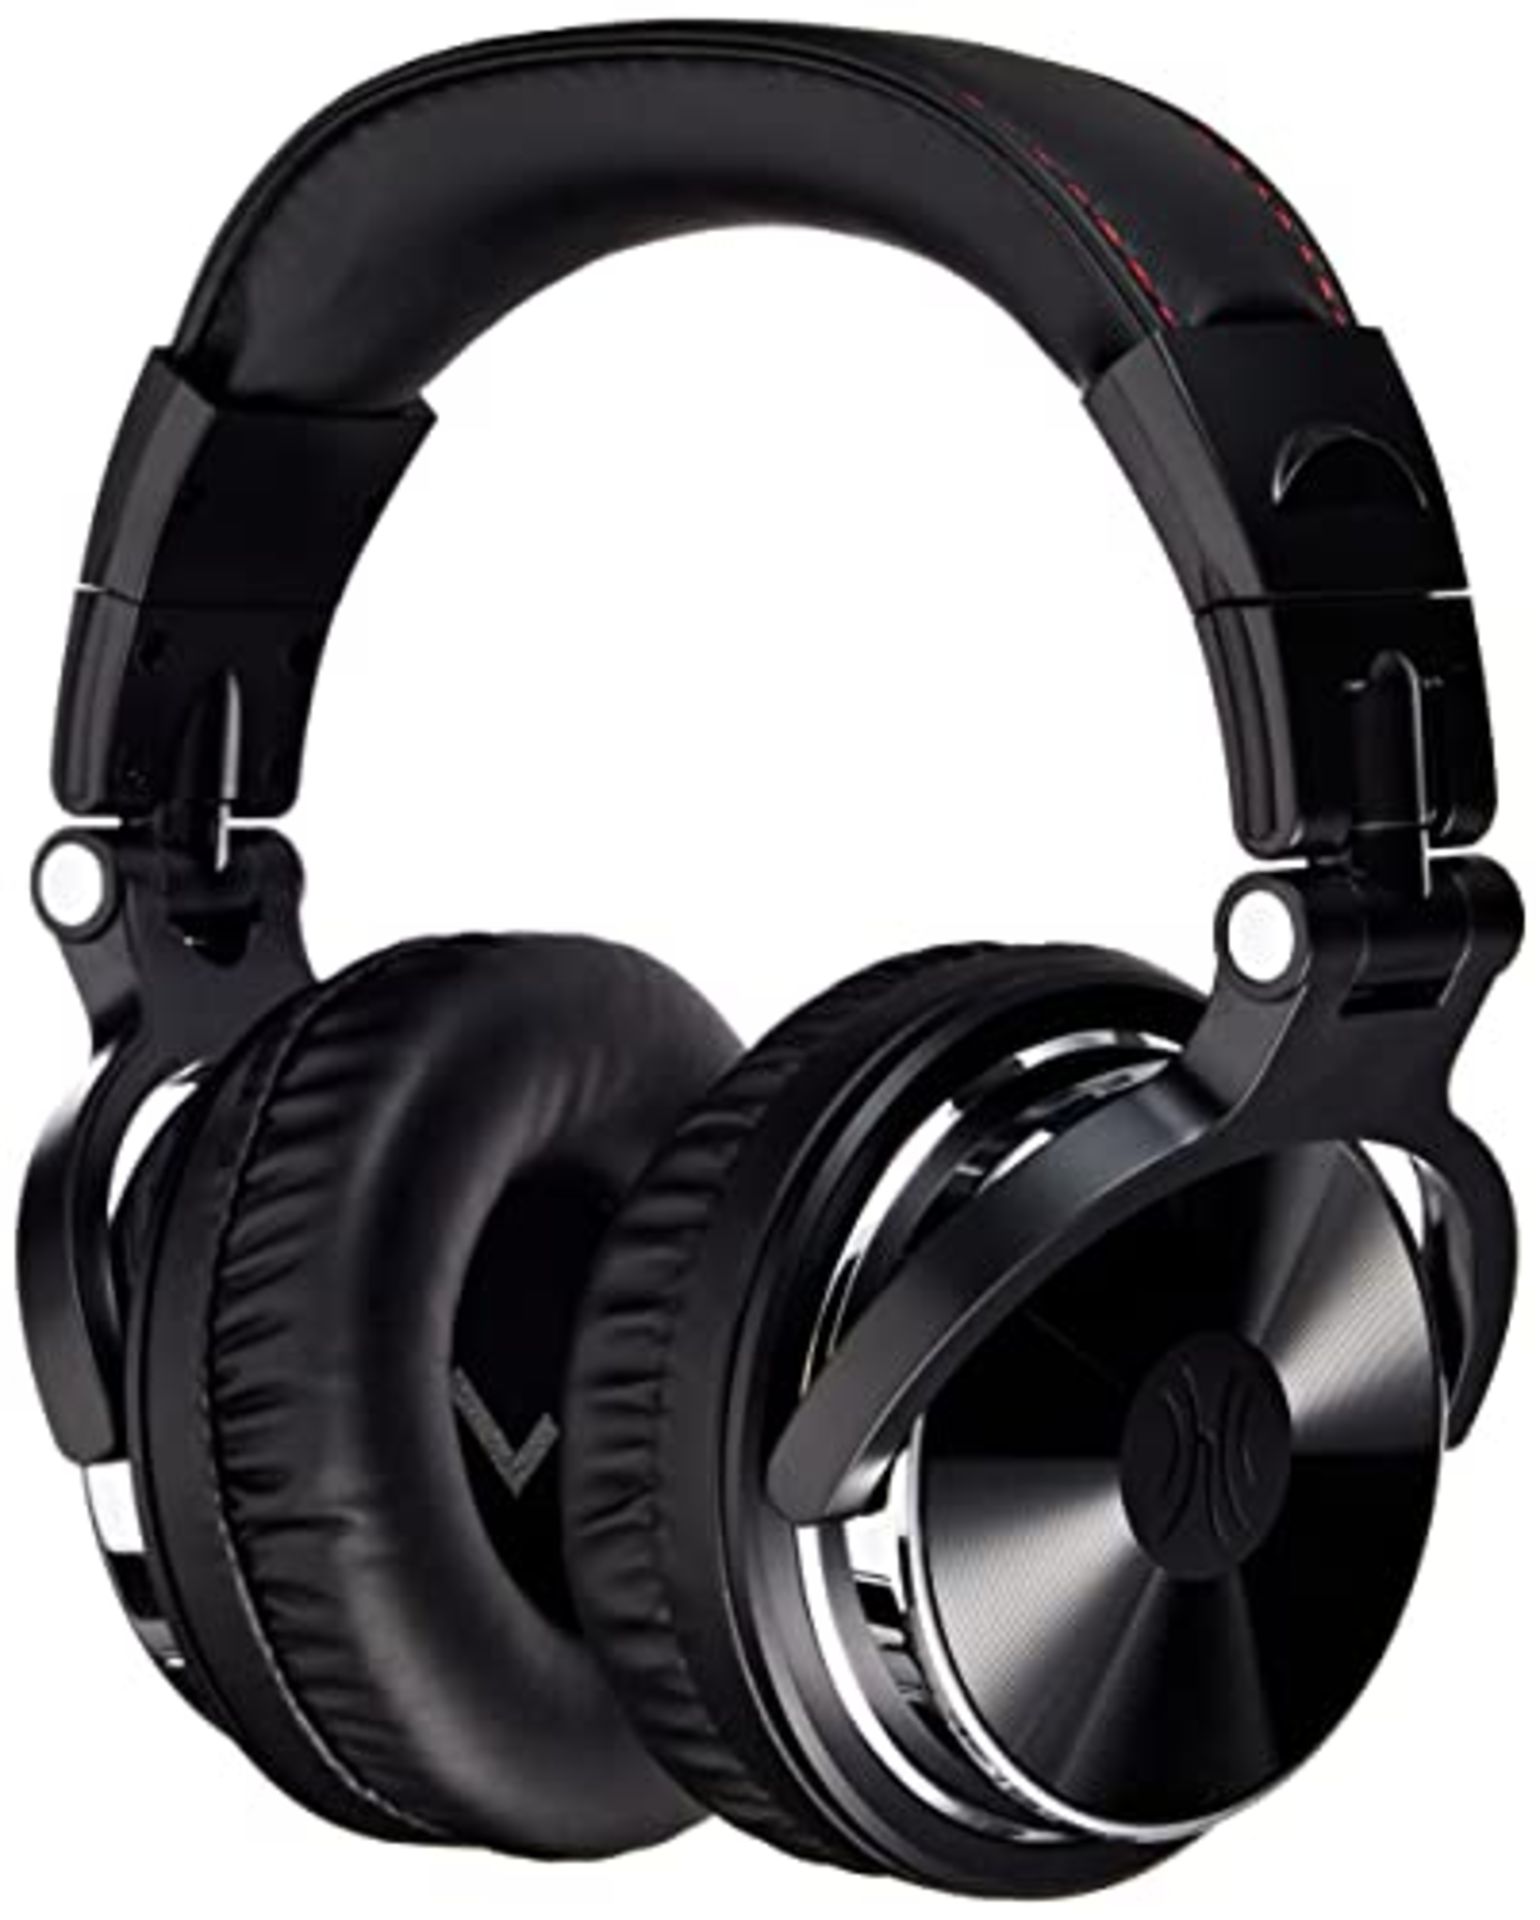 [CRACKED] OneOdio Over Ear Headphones with Cable, 50mm Driver, Bass Sound, 6.35 & 3.5m